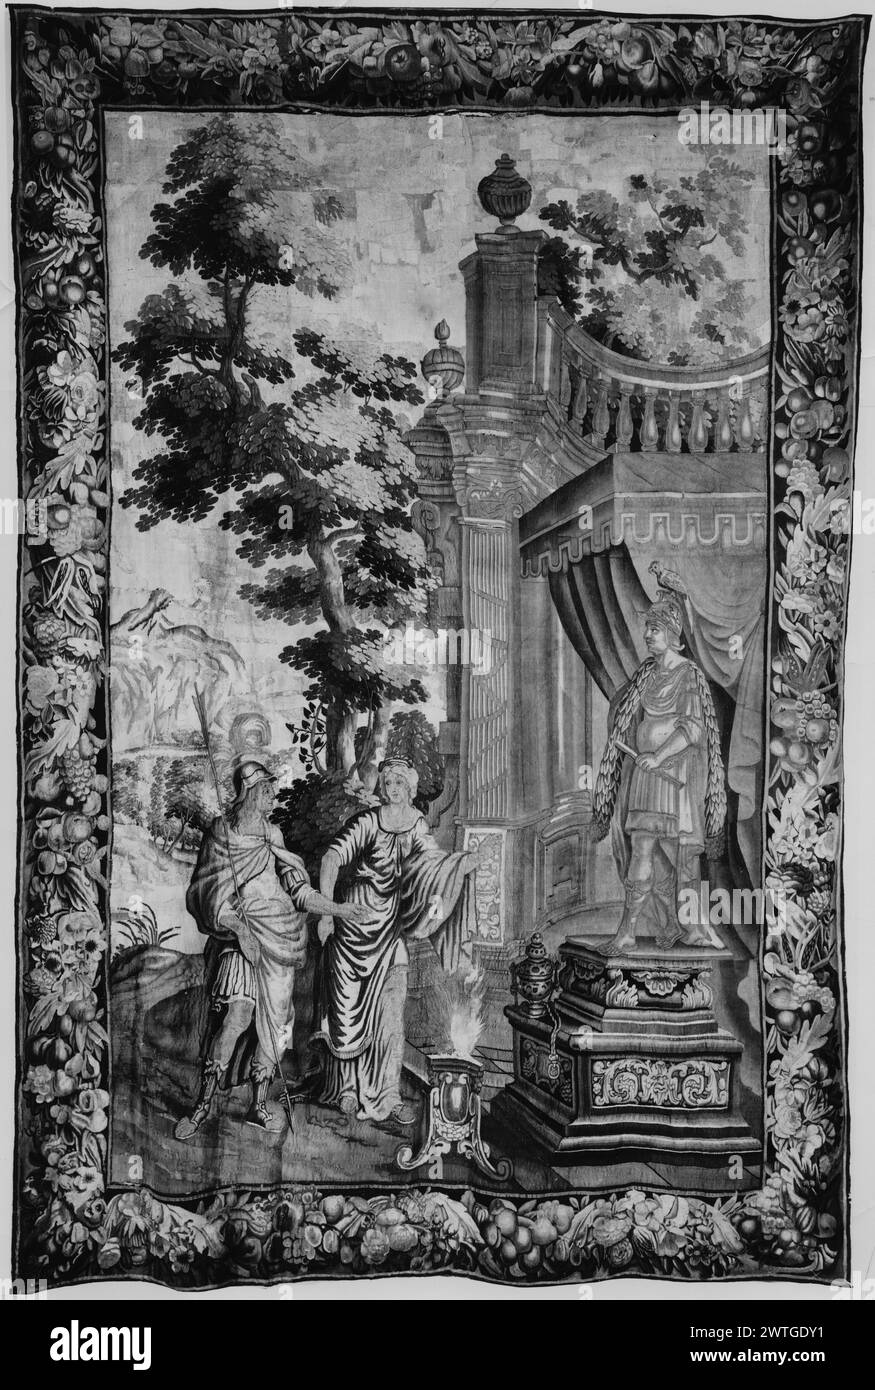 scene. unknown c. 1660-1680 Tapestry Materials/Techniques: unknown Culture: Flemish Weaving Center: unknown Ownership History: French & Co. purchased from Andre Azria, received 7/26/1961; sold to American Foreign Trade Development [Company] 8/13/1963. On pedestal beneath canopy stands Jupiter (?) with scepter, laurel swag, eagle & crown on head (R); soldier with plumed helmet & female figure (L) stand before burning altar (BRD) garland with fruit & flowers French & Co. stock sheet in archive, E-37 [also lists: G-99] Related Works: Compositionally similar tapestry (same cartoon): GCPA 0240319 Stock Photo